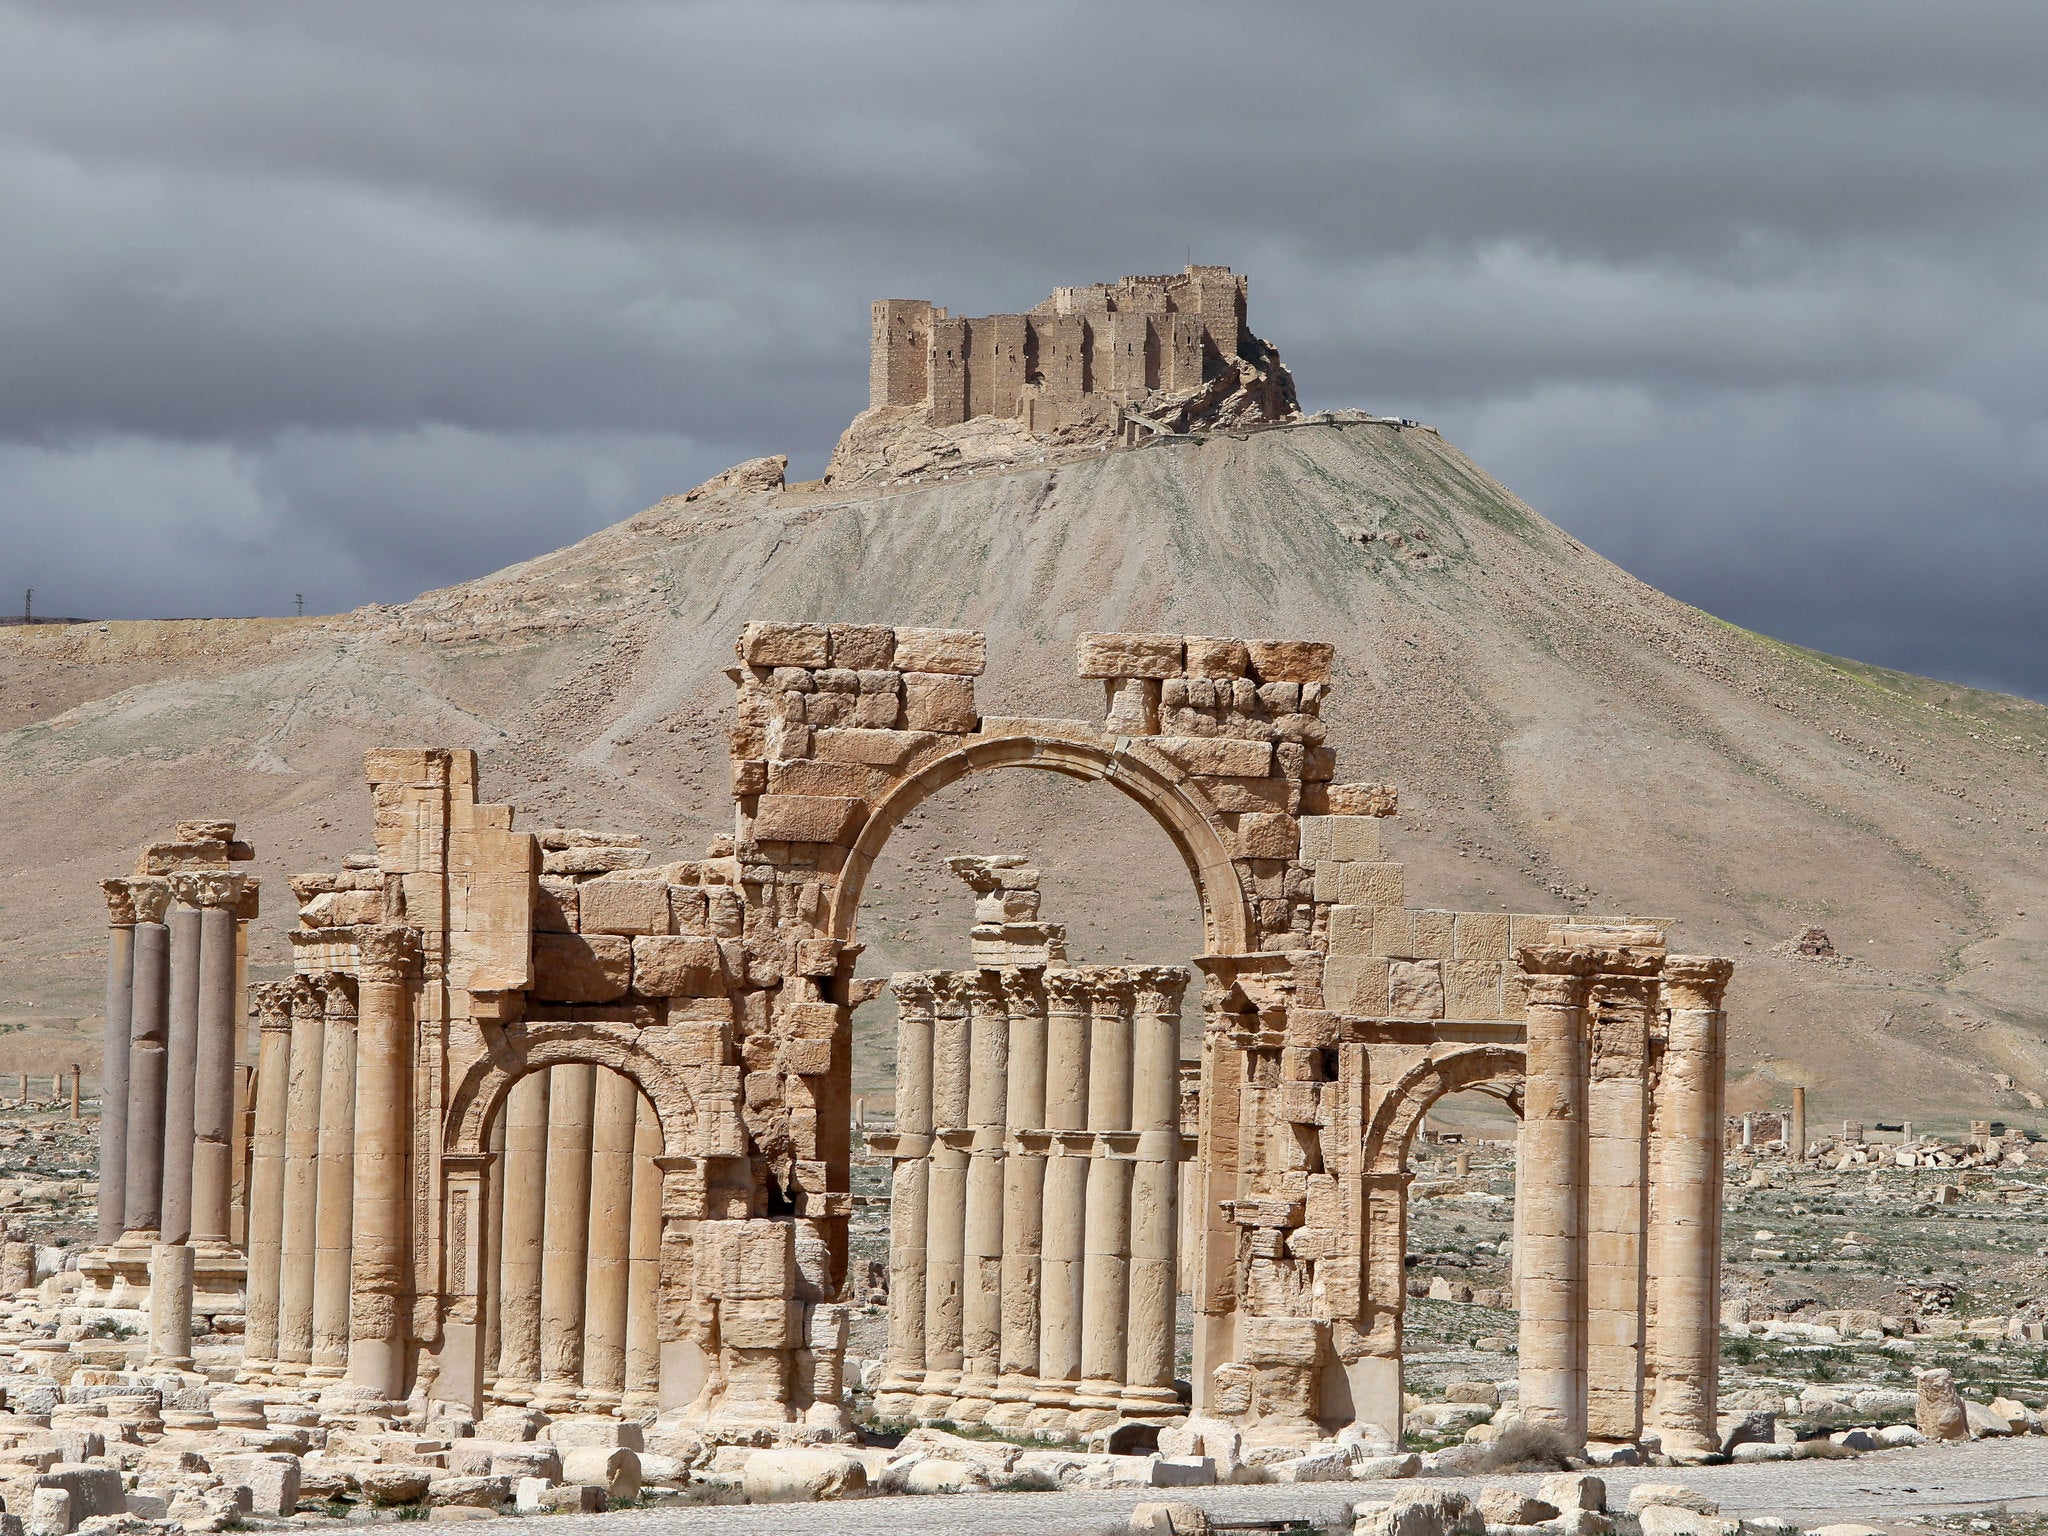 Isis have destroyed many important historical ruins in Palmyra, and have killed many of its residents